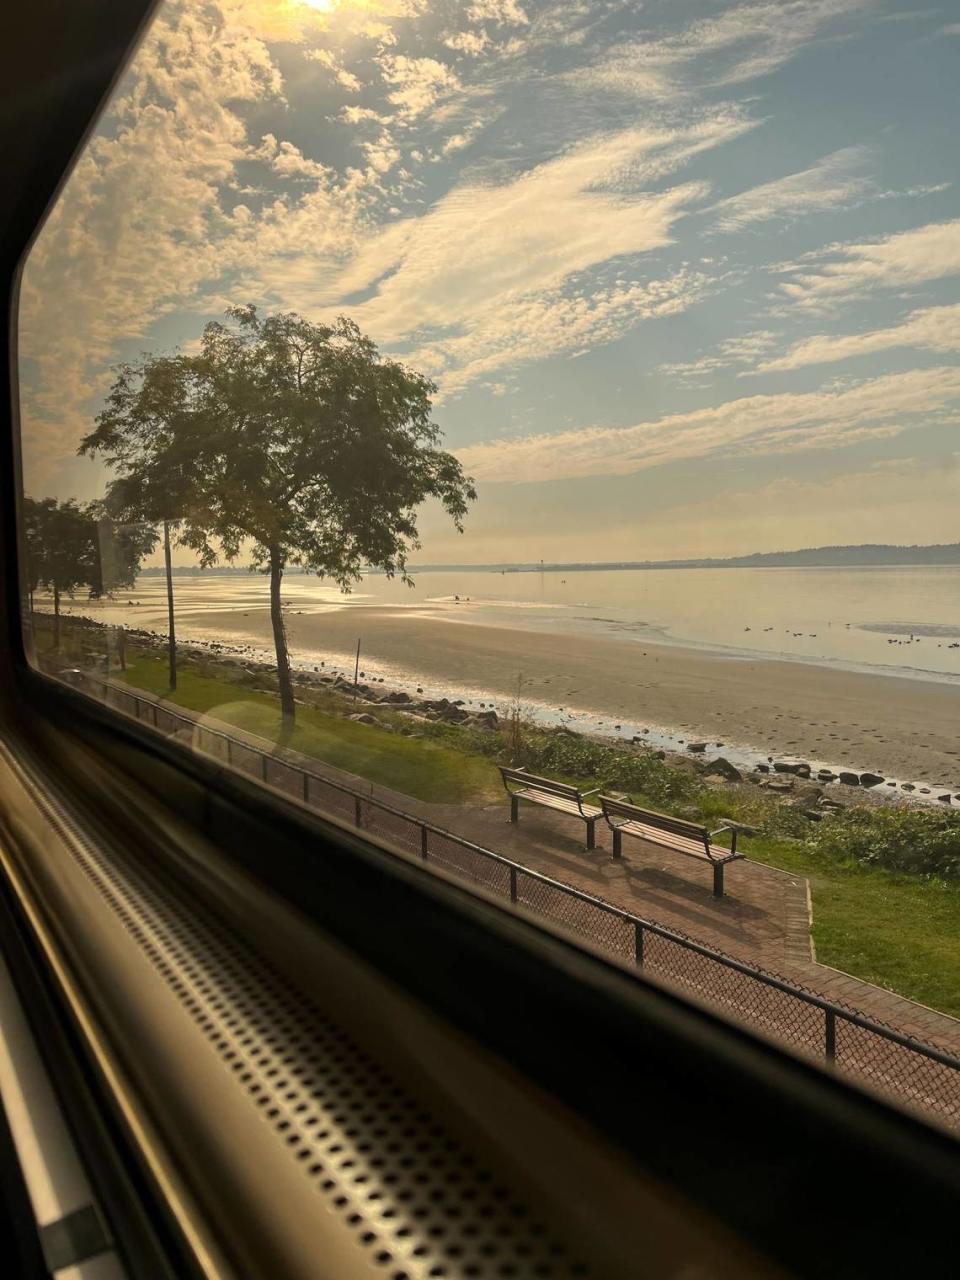 Amtrak’s Cascade train passes White Rock, B.C., as passenger service from Seattle to Vancouver, B.C., is offered for the first time since March 2020 on Monday, Sept. 26.